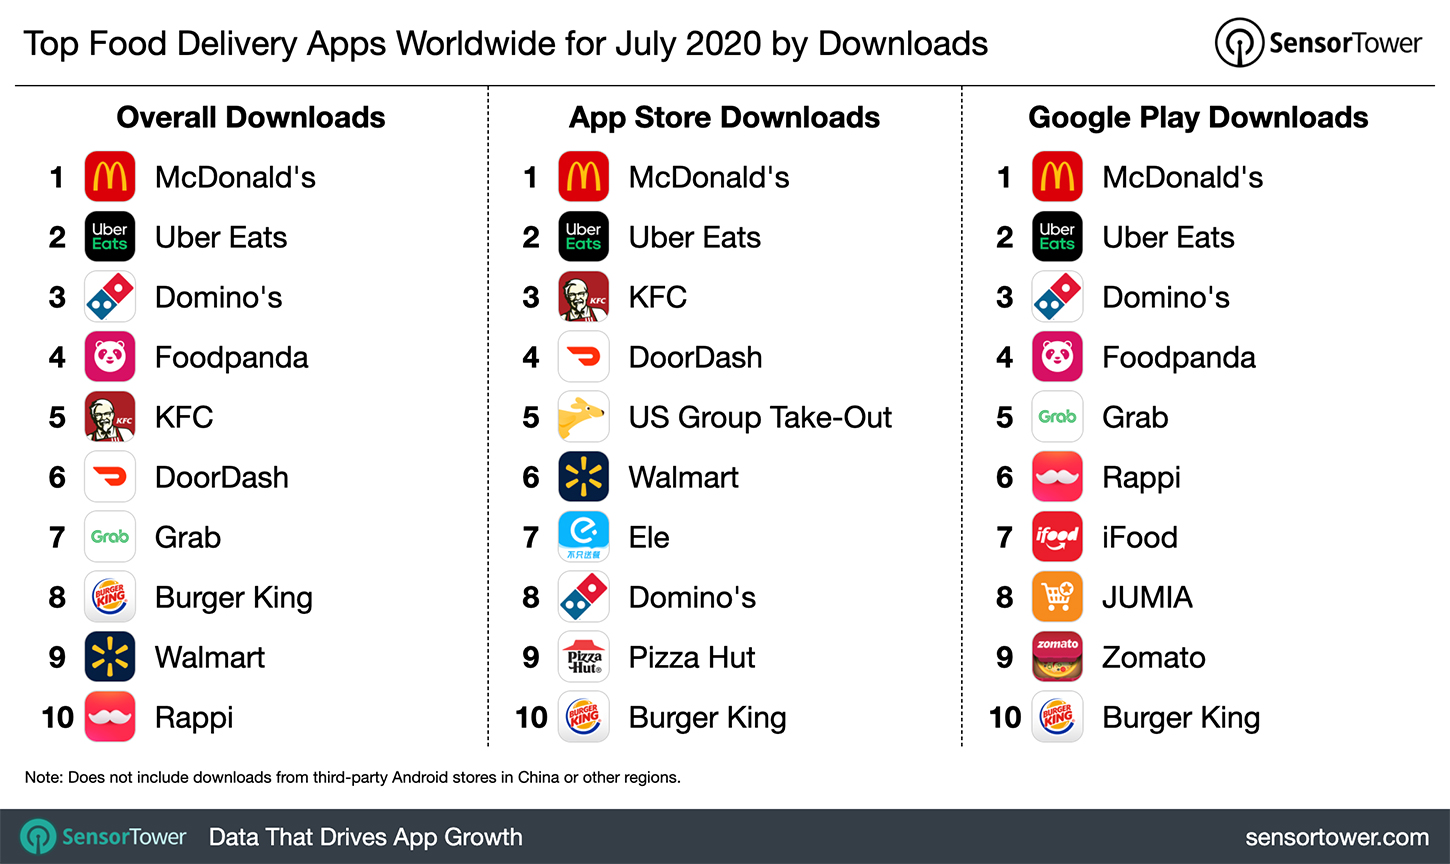 Top Food Delivery Apps Worldwide for July 2020 by Downloads